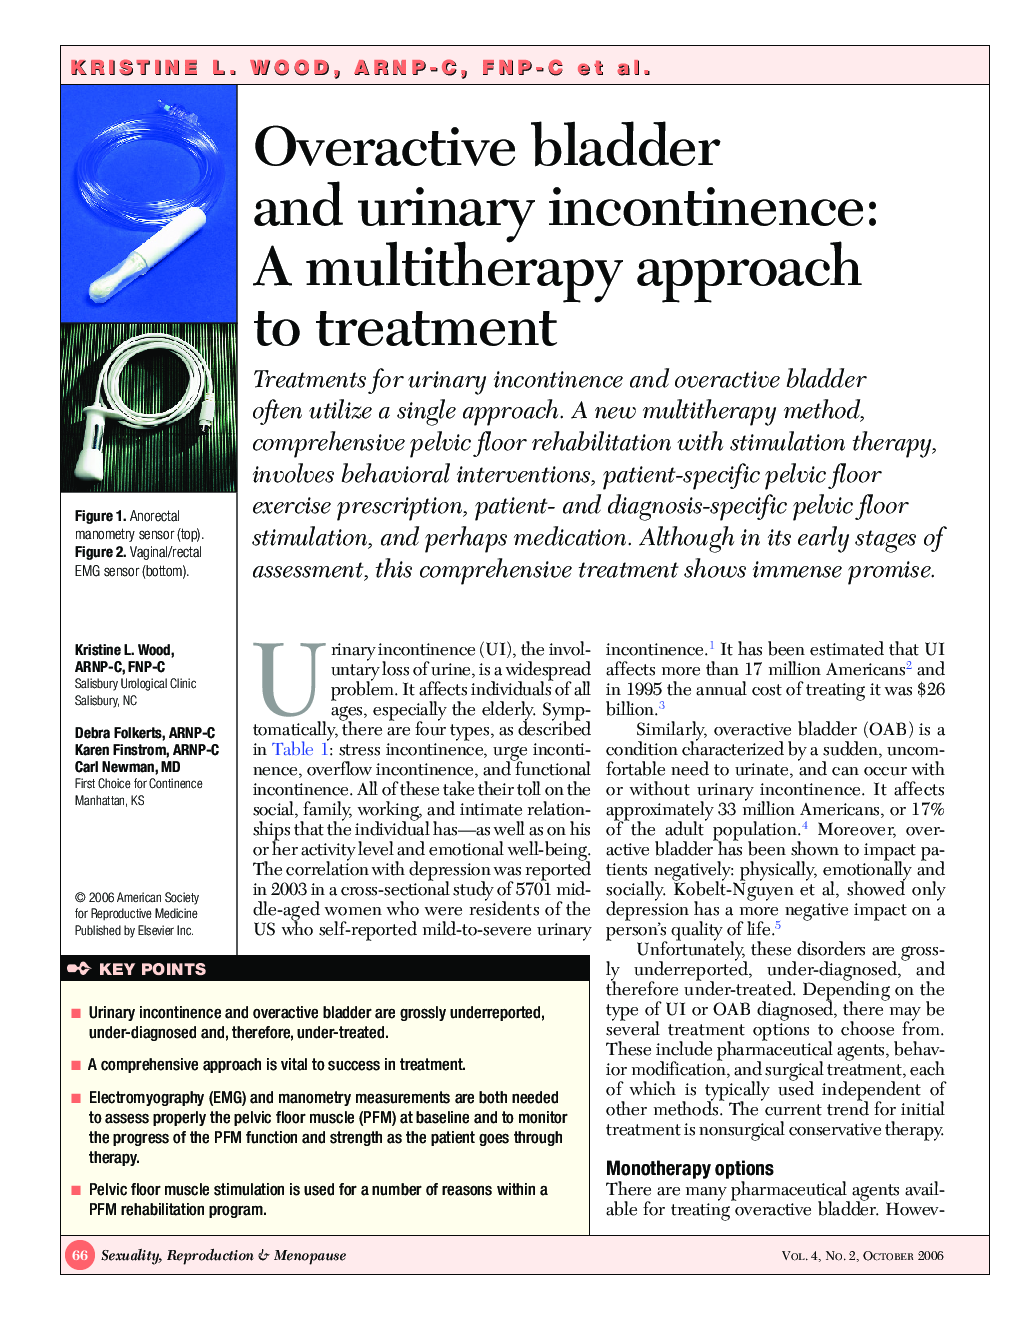 Overactive bladder and urinary incontinence: A multitherapy approach to treatment